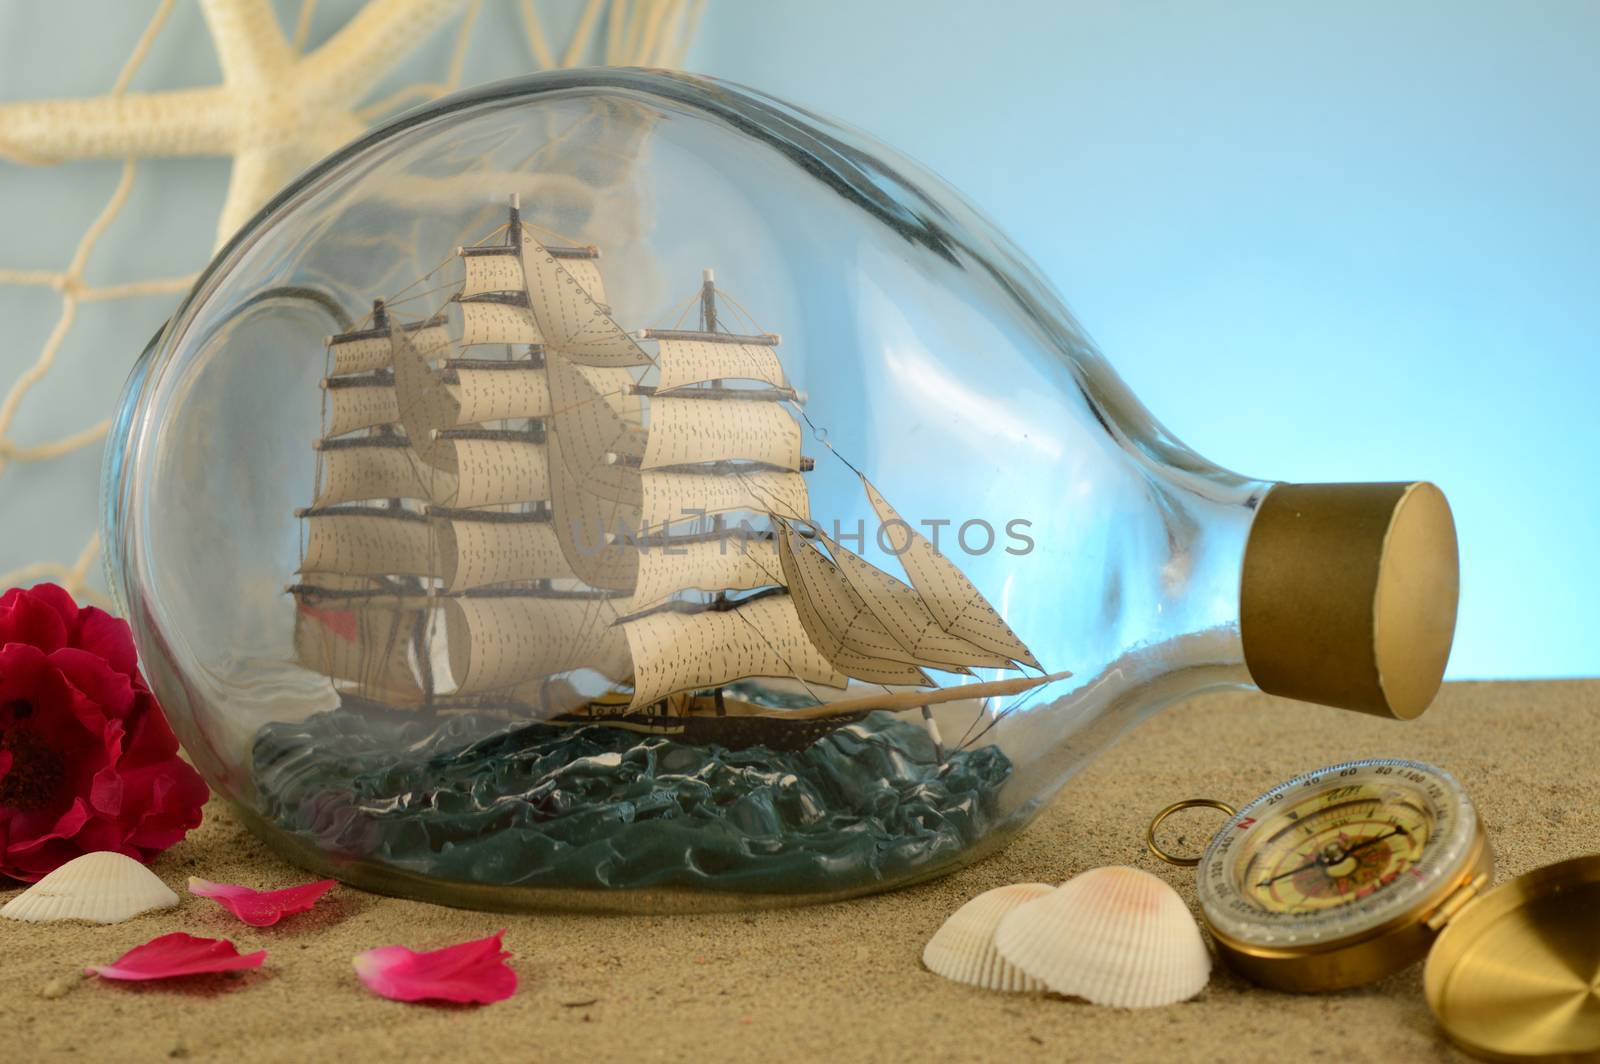 A nautical scene with a ship in a bottle.